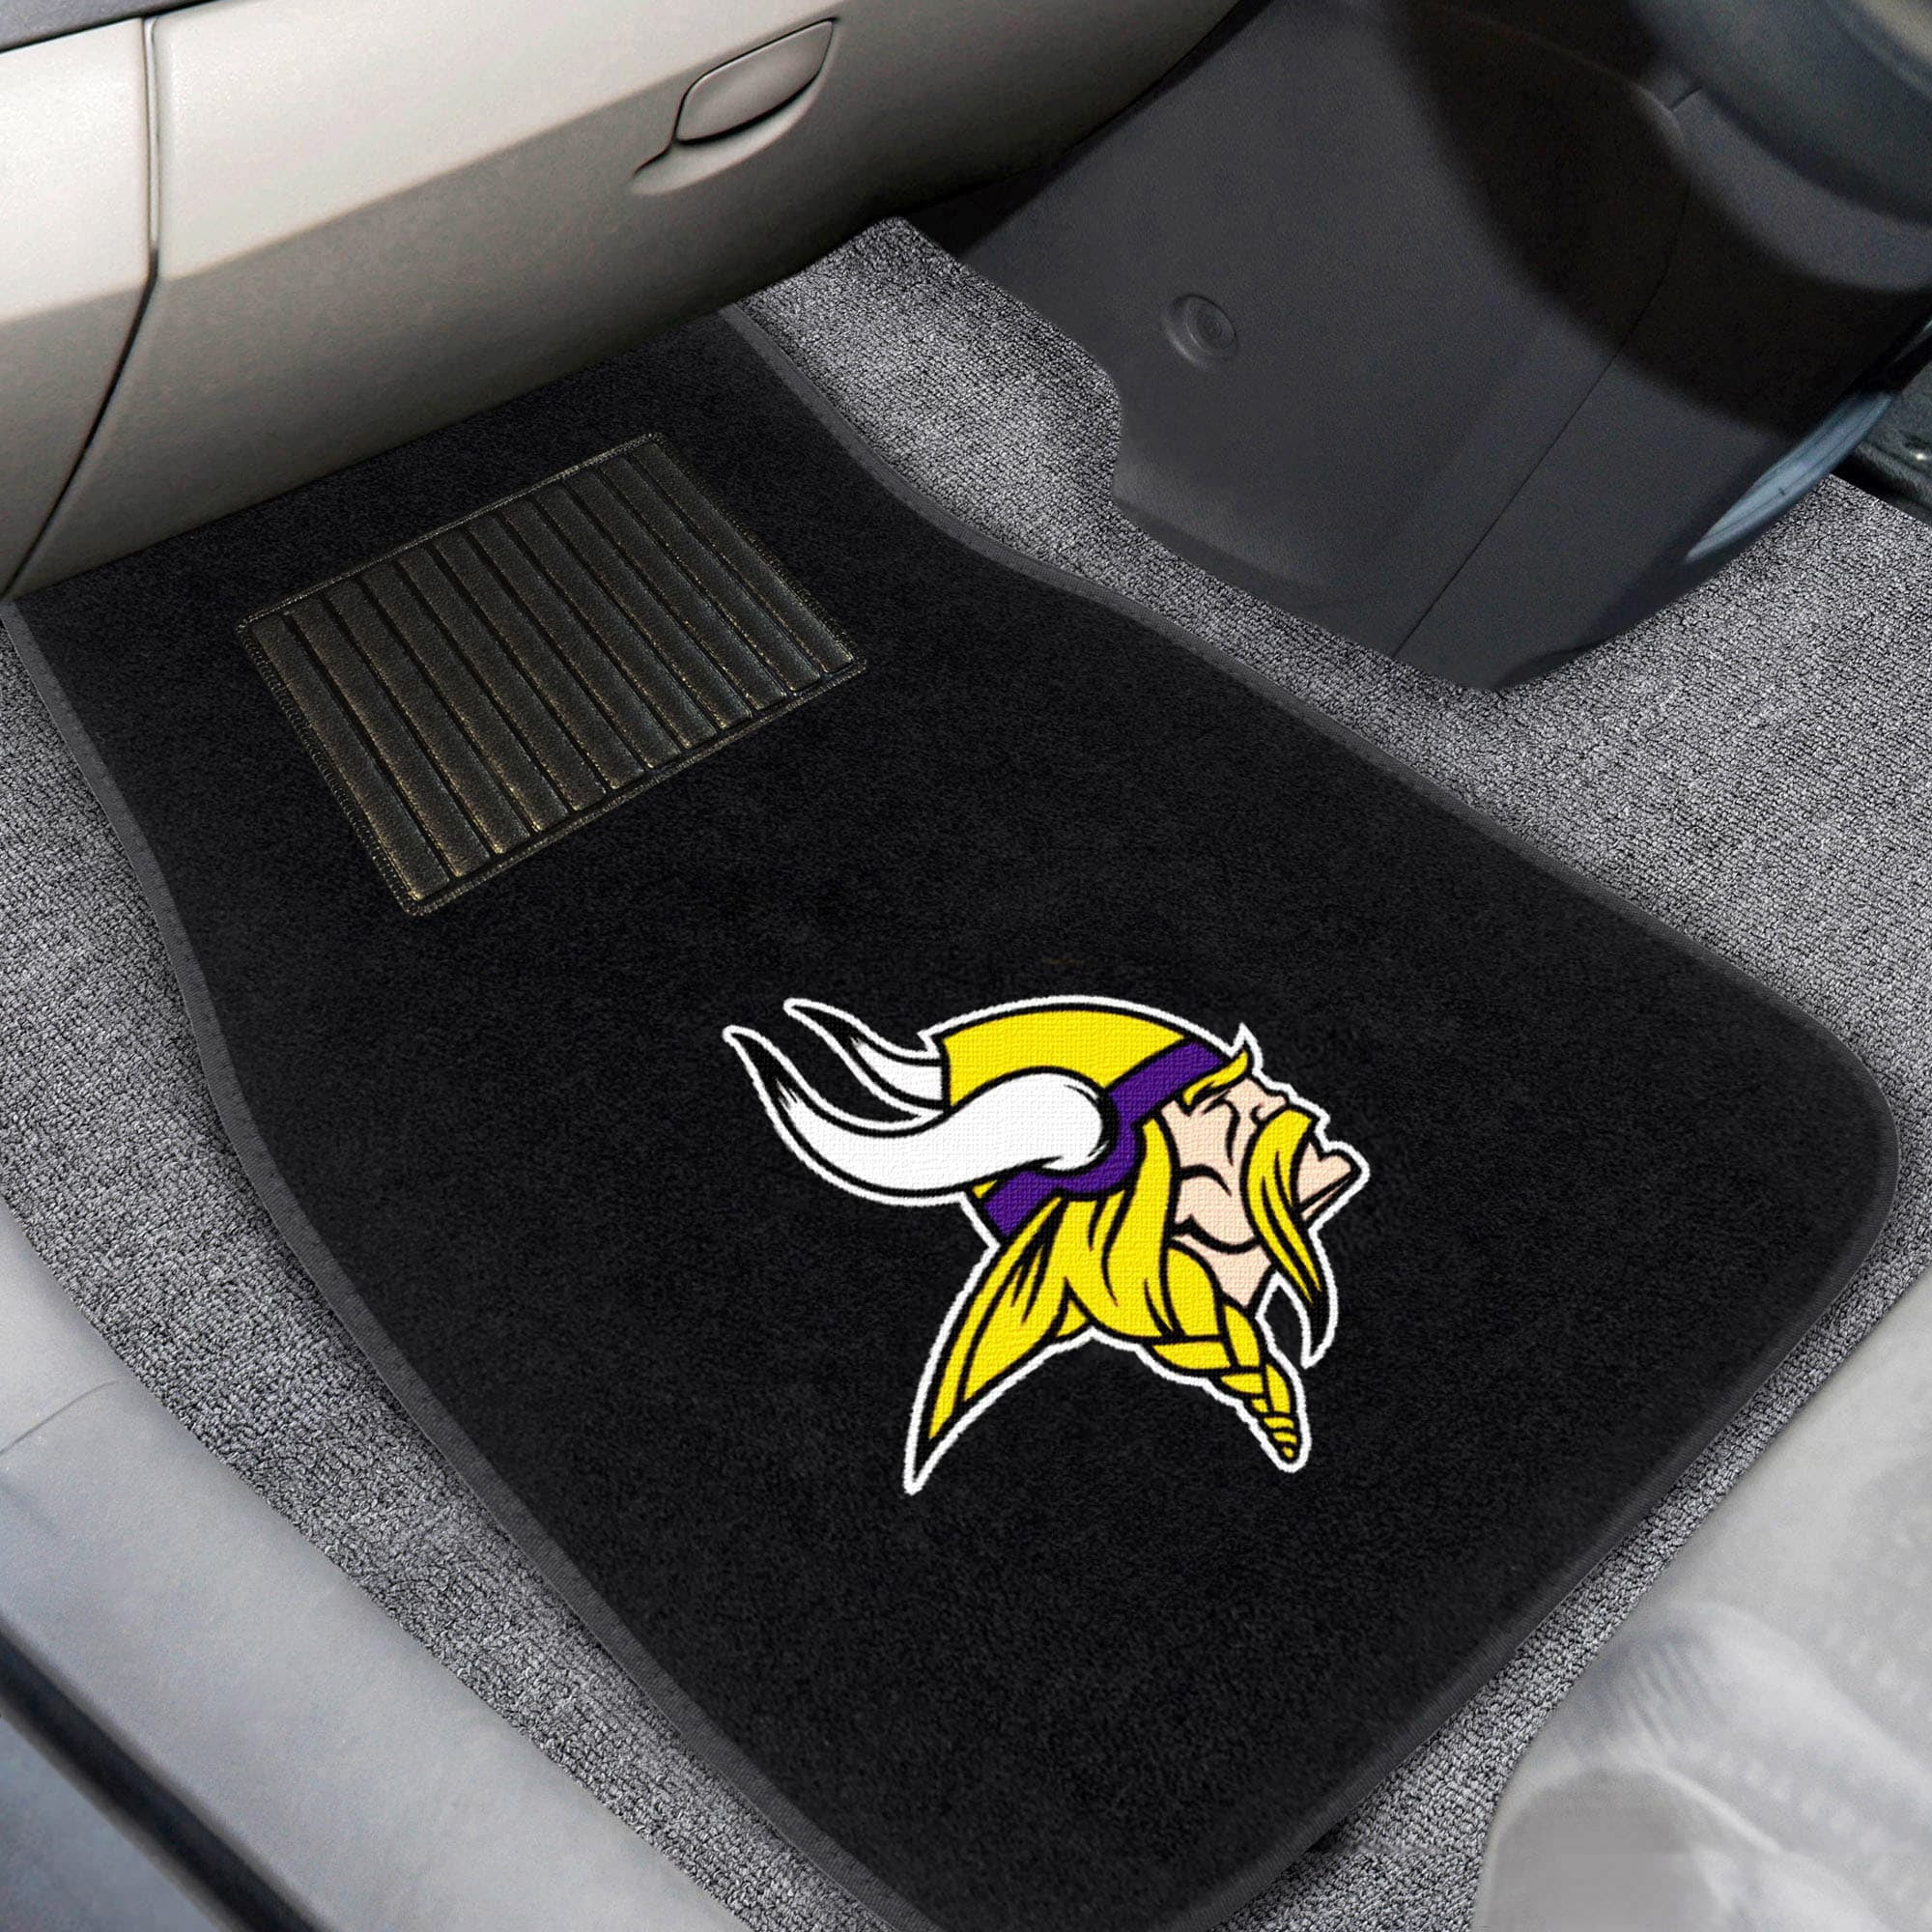 2020 New York Giants Car Seat Cover Personalized Nonslip Auto Seat Protector 